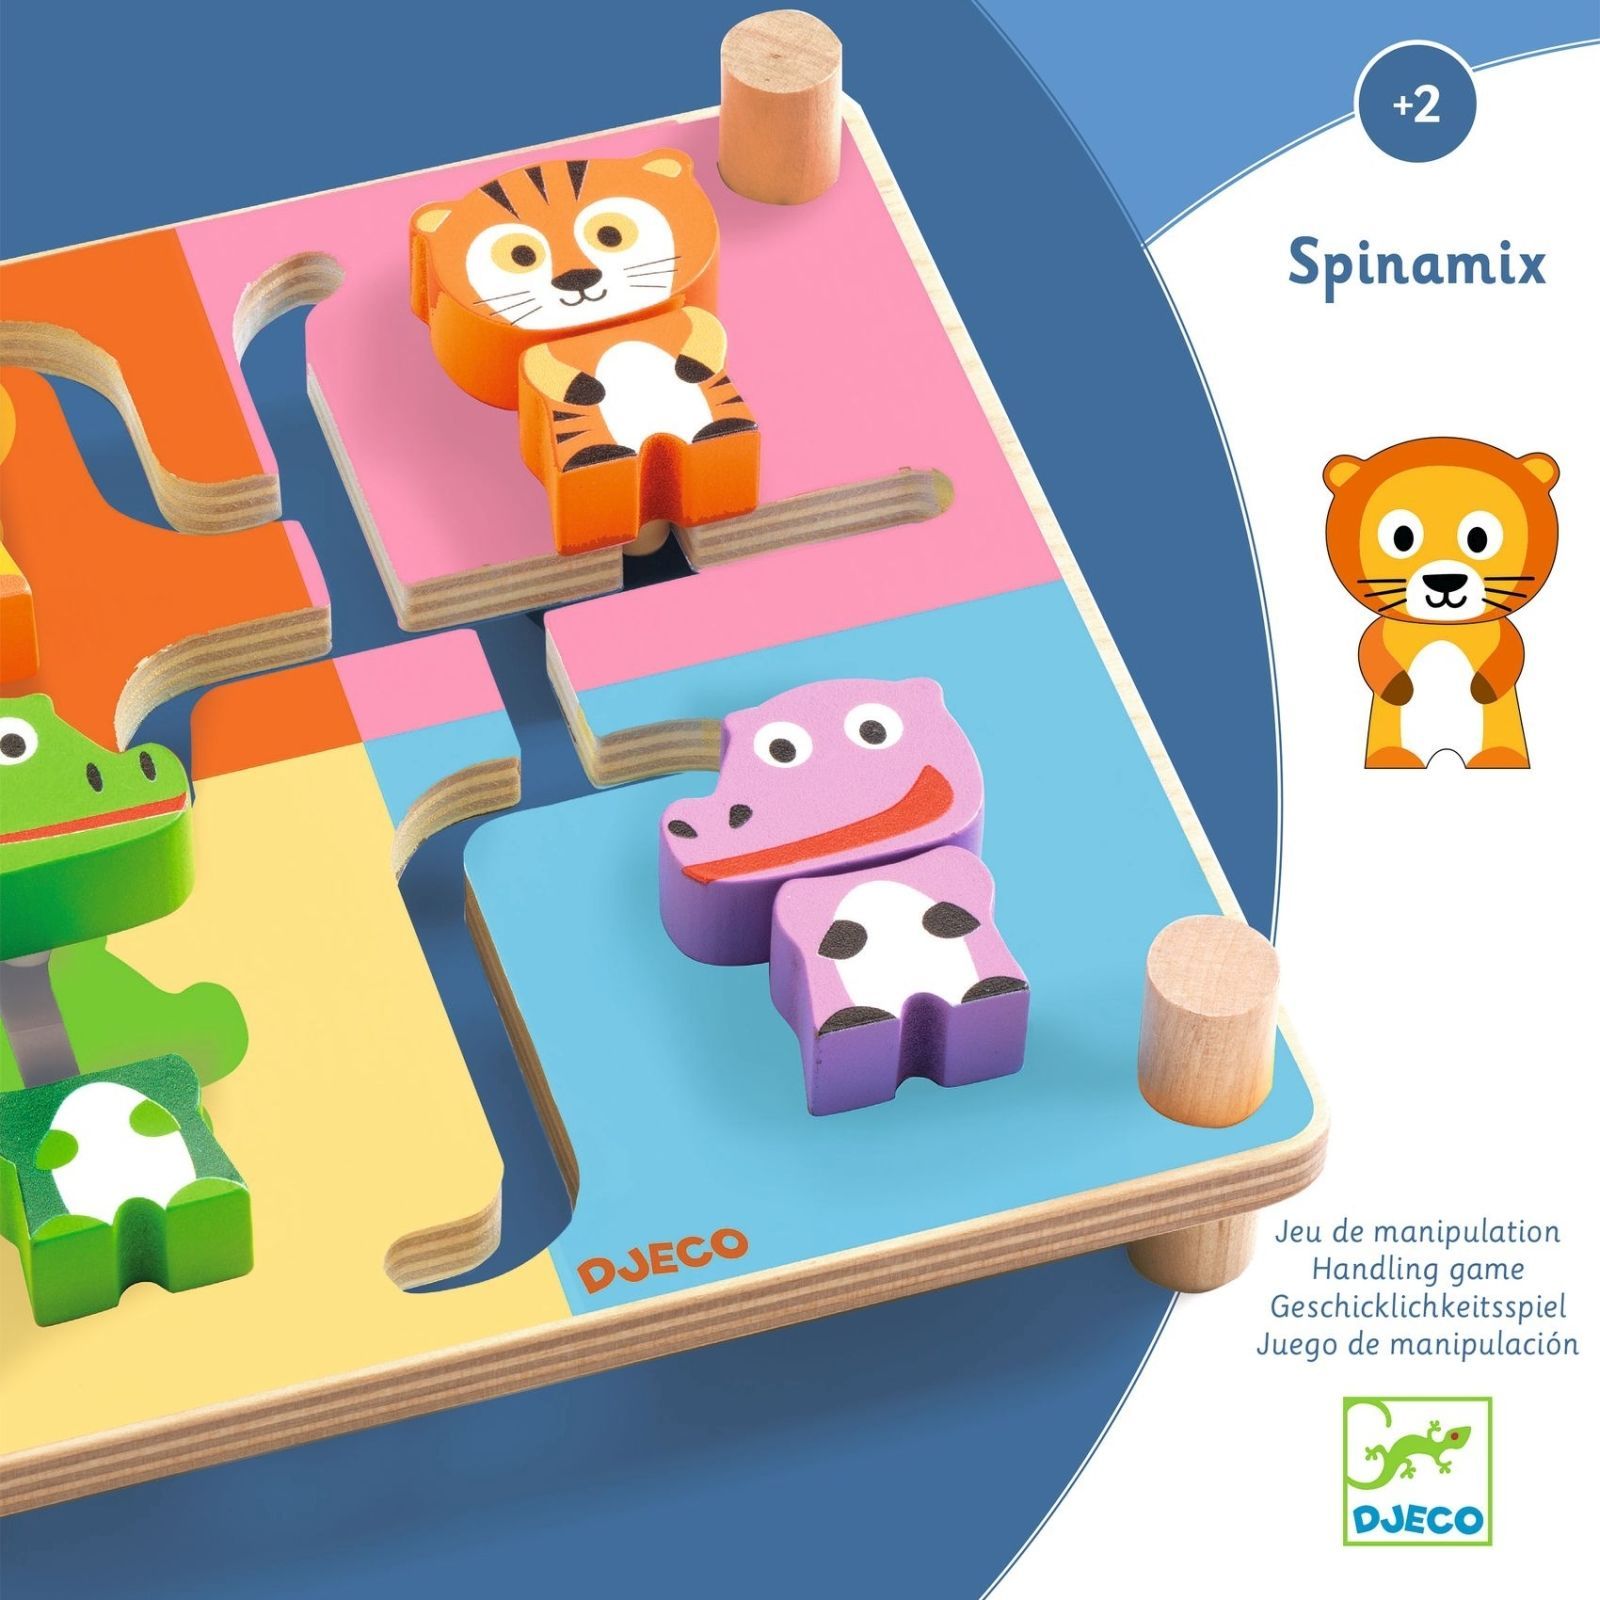 Djeco Educationnal wooden games Spinamix